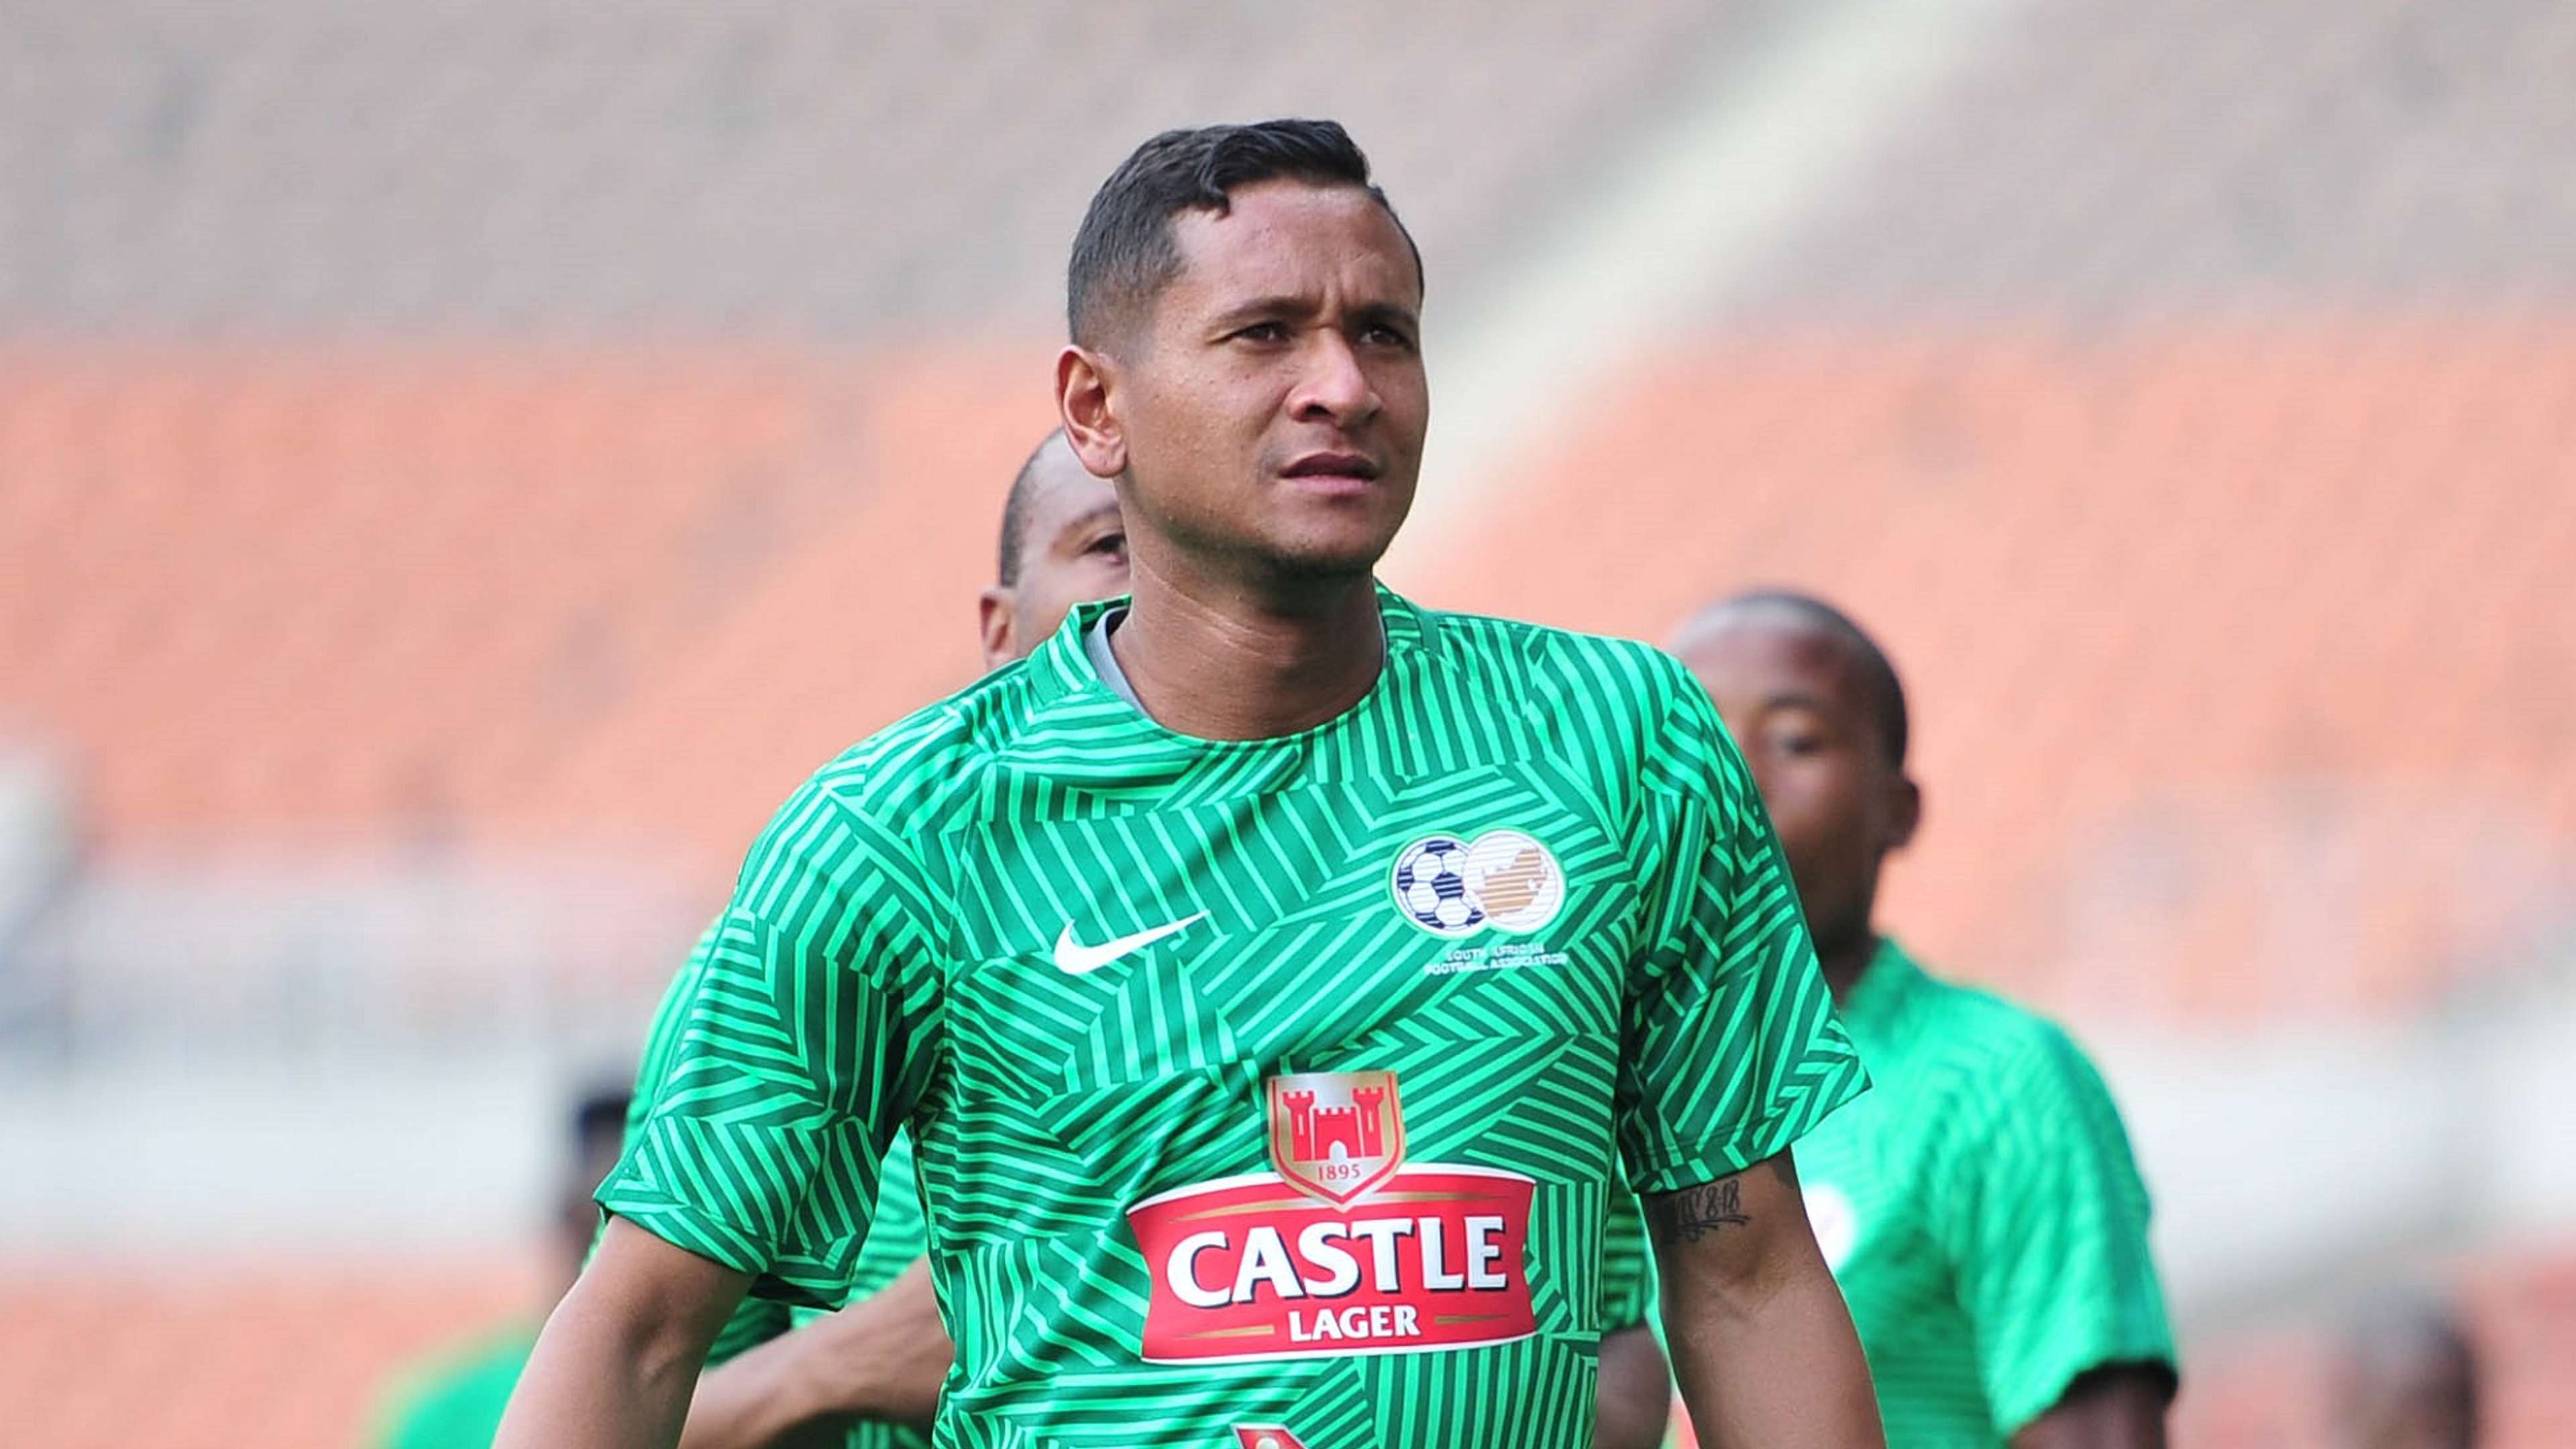 Daine Klate during a triaing session with South Africa Bafana Bafana in 2016